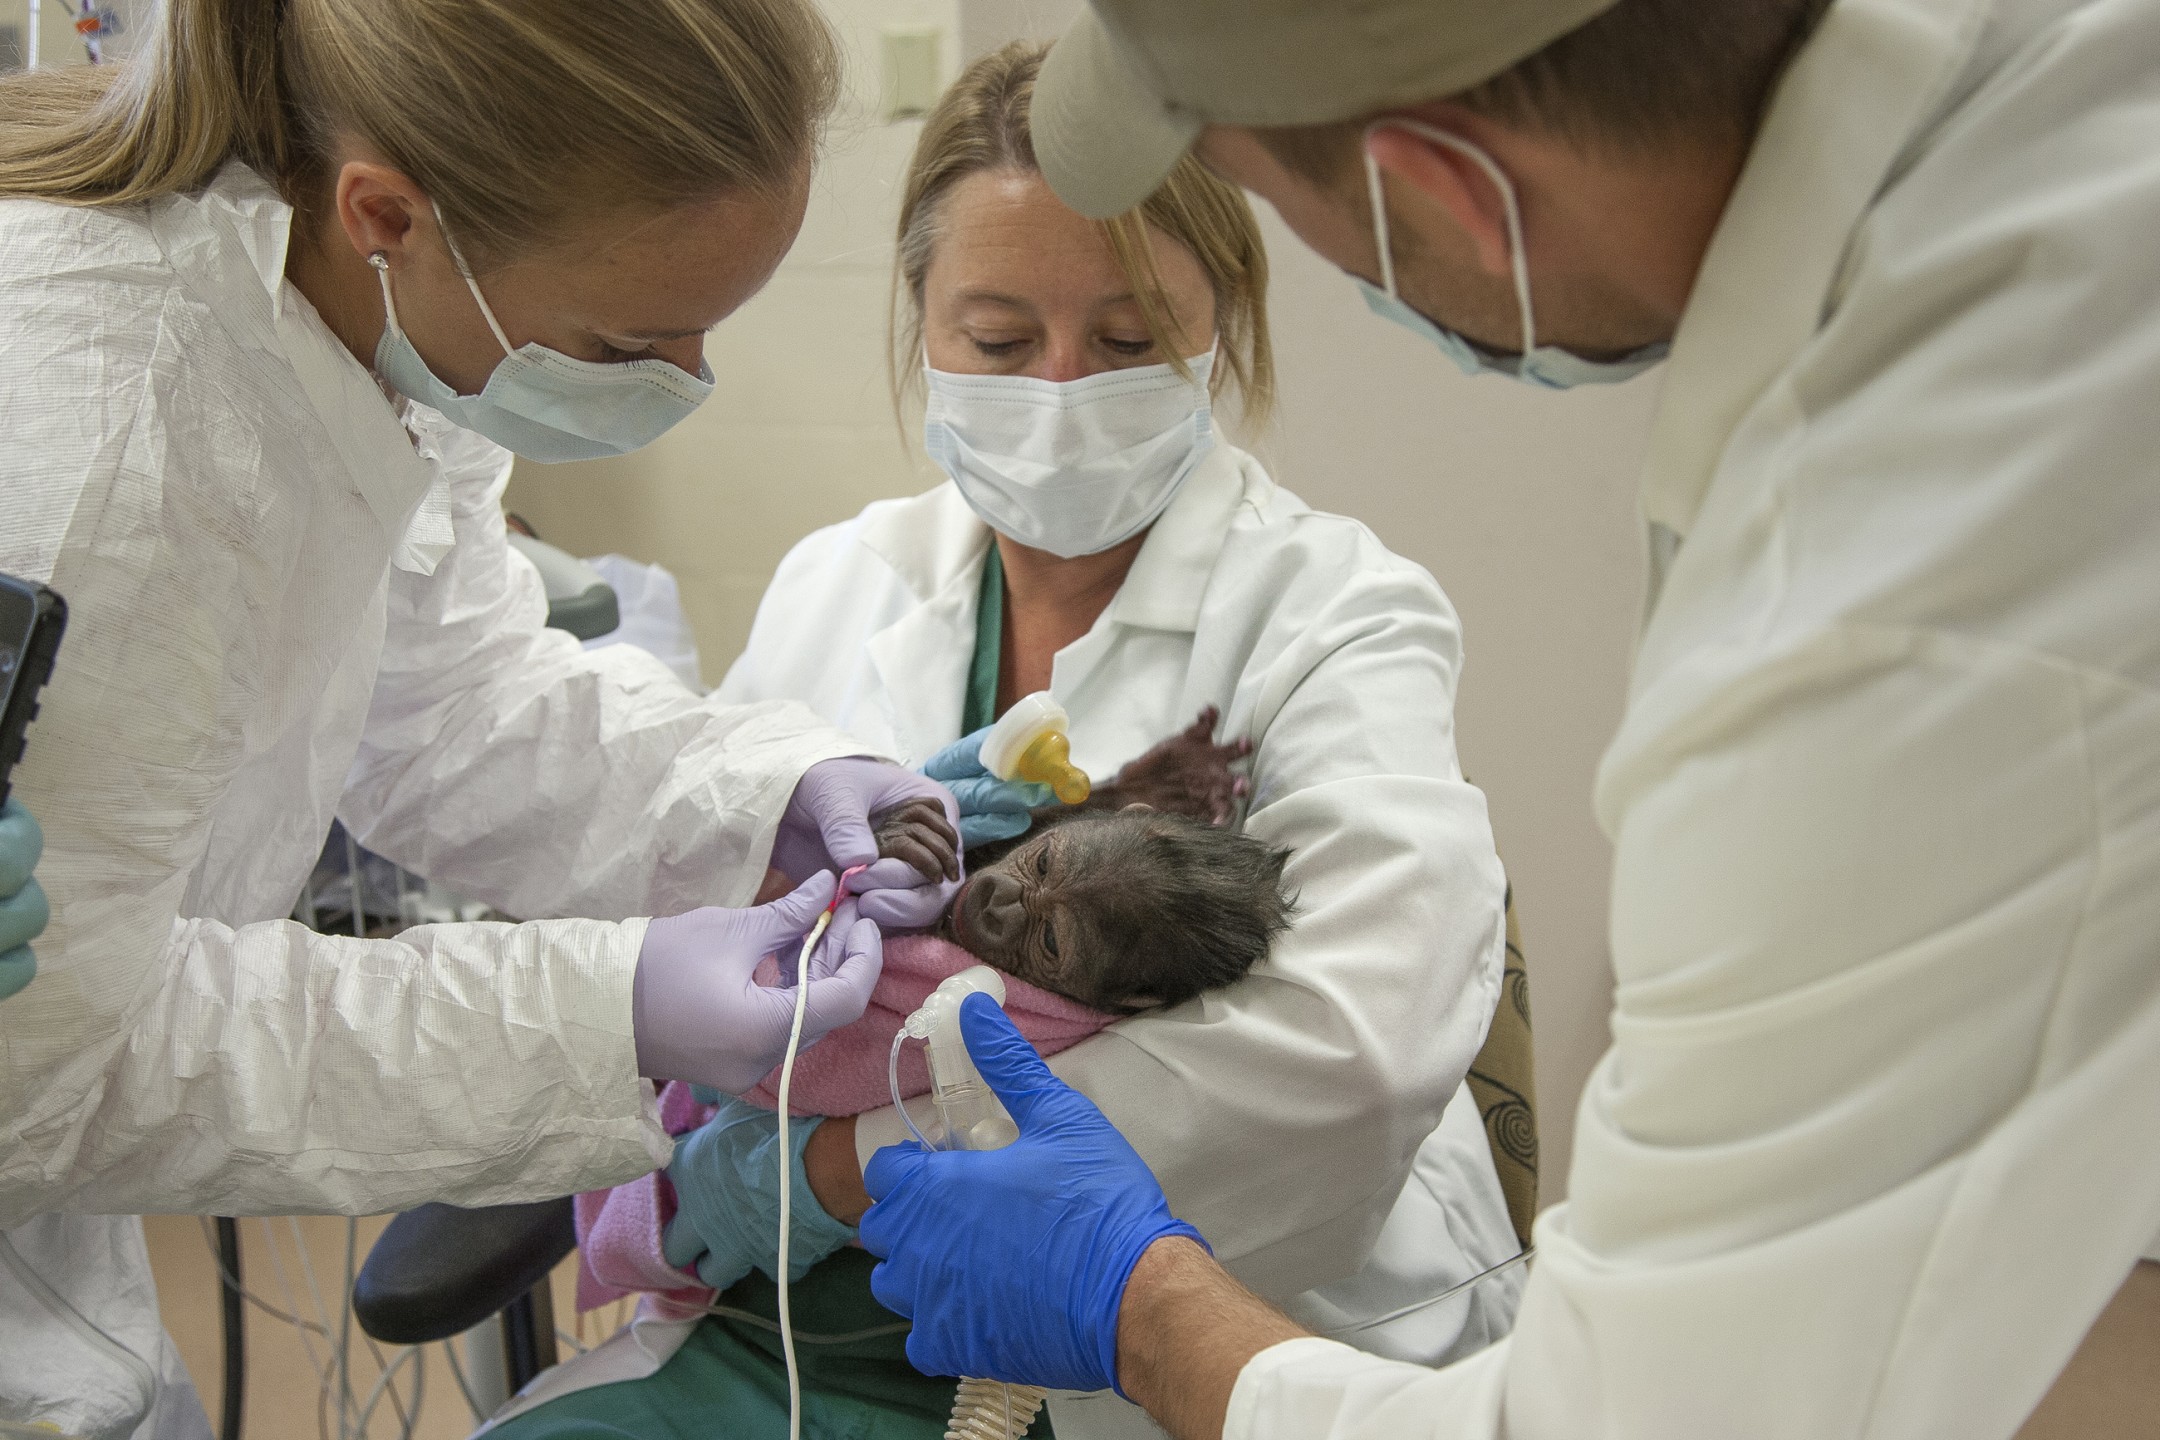 When gorilla Imani showed signs of trouble during her delivery, she was taken to the Zoo's Harter Veterinary Hospital and the baby was delivered by c-section. The baby, later named Joanne, was full term and weighed 4.6 pounds. She was delivered by a team of San Diego Zoo Global staff and outside consultants, including Dr. Dawn Reeves, a human neonatal specialist from UCSD Medical Center. Then Joanne showed signs of complications believed to be related to the difficult labor—she was put into intensive care to receive oxygen and supplemental fluids. The baby was breathing a lot faster and her heart rate was elevated. They did an x-ray and confirmed that the baby gorilla had a collapsed lung and had to undergo treatment. The care team, including Dr. Mark Greenberg, an anesthesiologist and respiratory specialist from UCSD Medical Center, quickly assembled for a procedure to fix the collapsed lung. After carefully intubating Joanne, they suctioned out a mucus plug that was in her right lung, likely aspirated at the time of delivery. Following the procedure the medical teams were able to re-inflate the lung. After a repeat chest x-ray, both lungs were fully inflated and the procedure was successful.